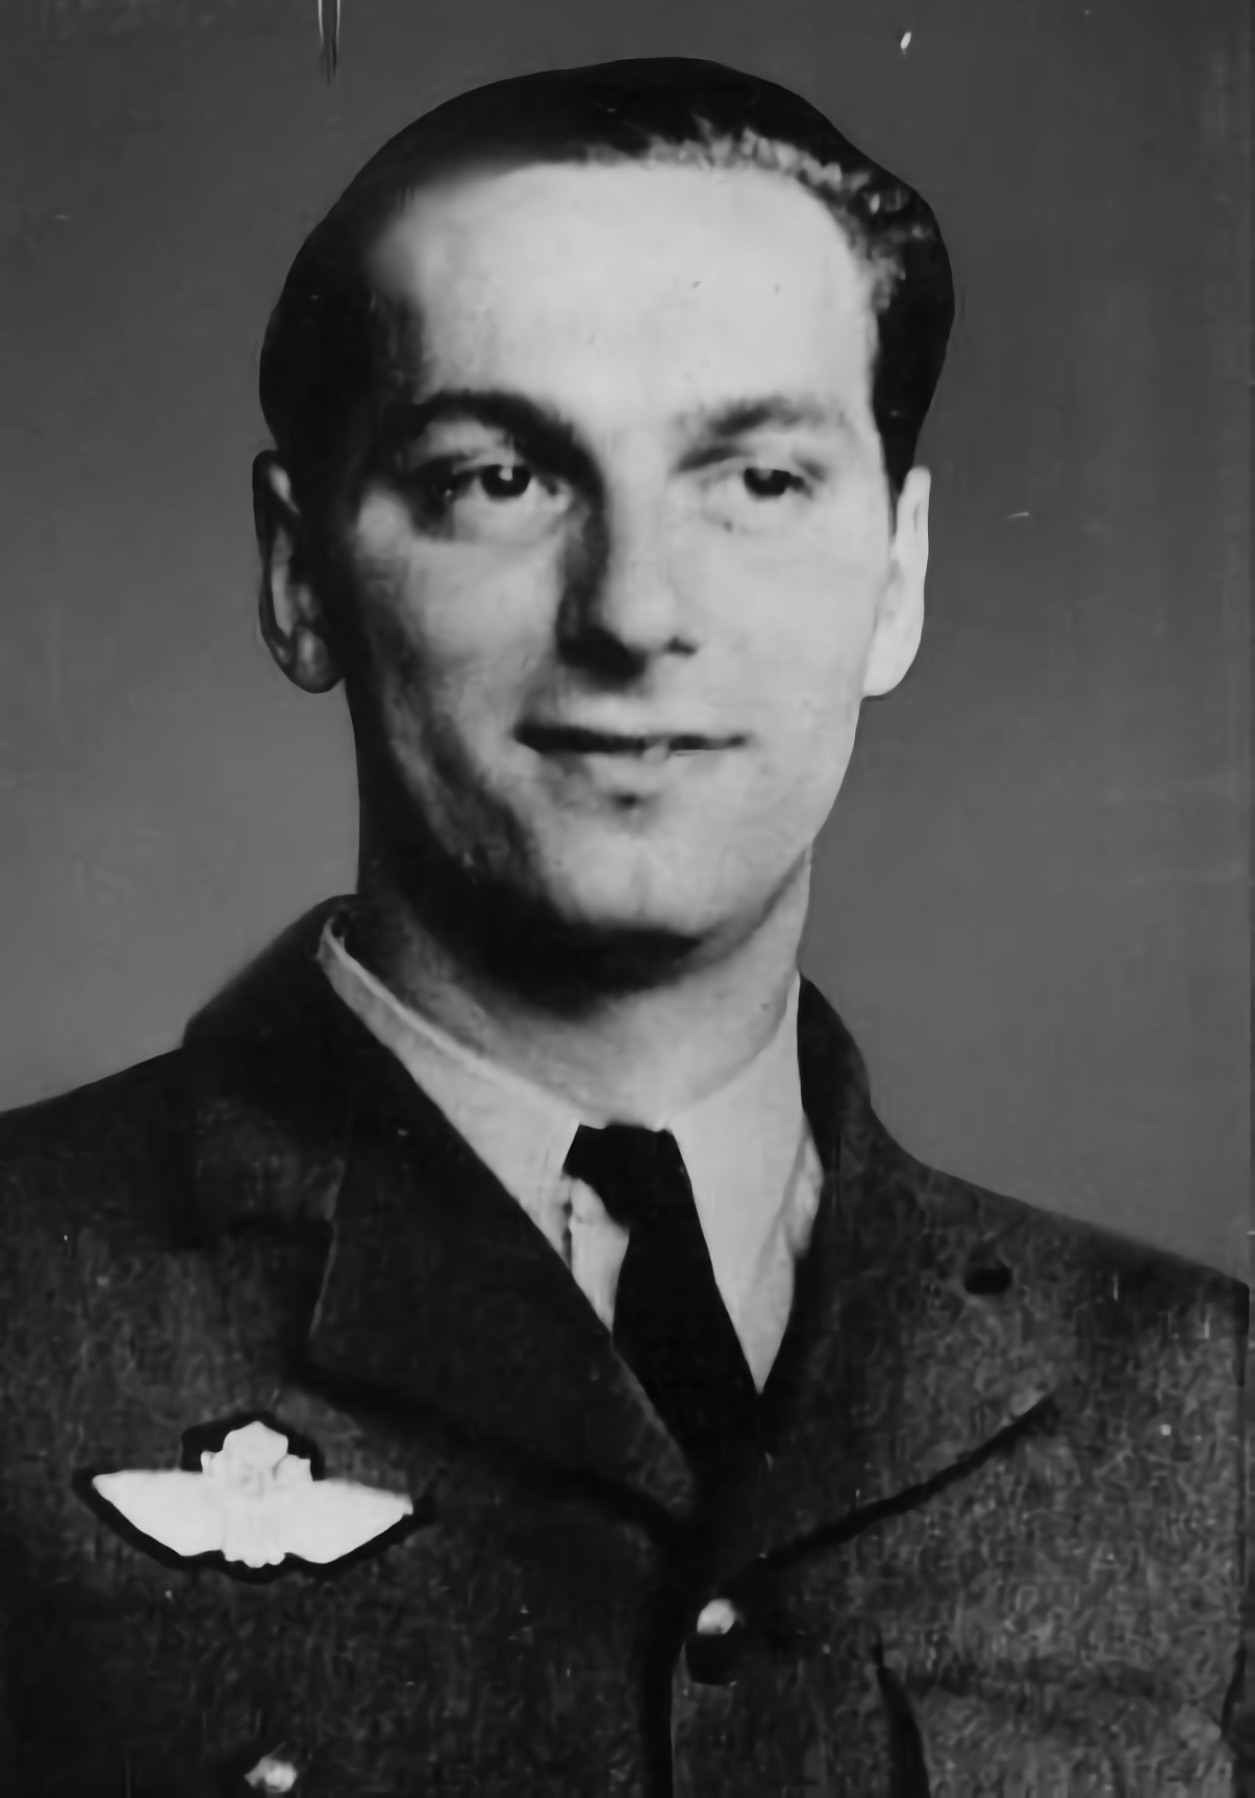 Prince Jacques in his Royal Norwegian Air Force uniform after the war.